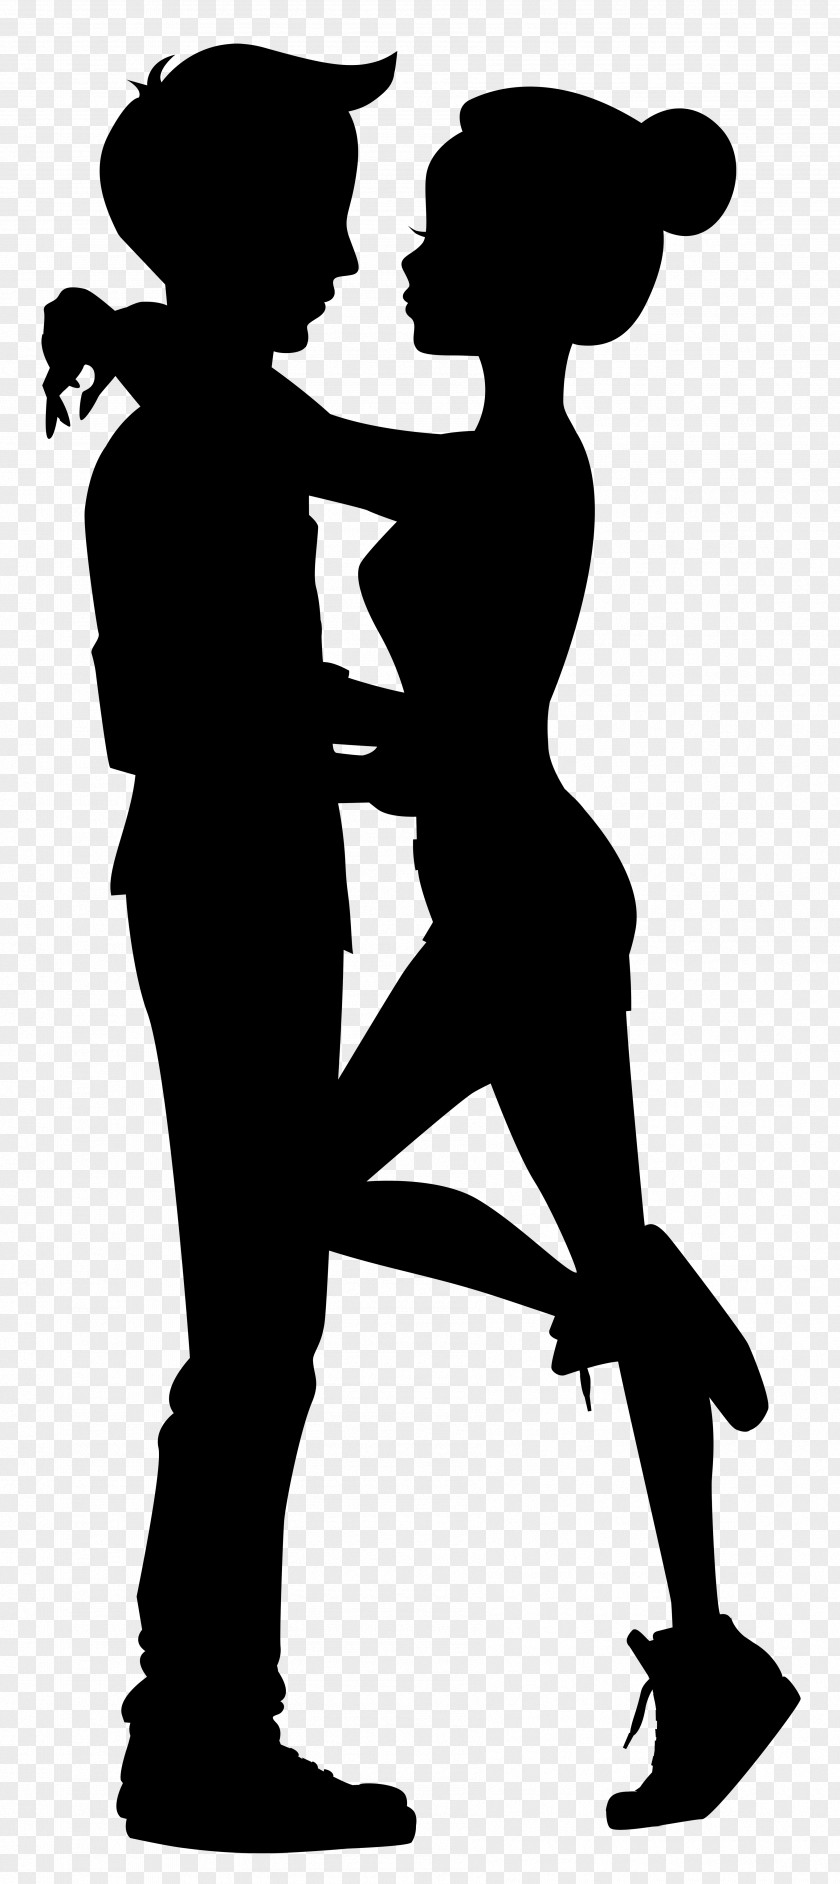 Cute Couple Silhouettes Clip Art Image Silhouette Drawing PNG